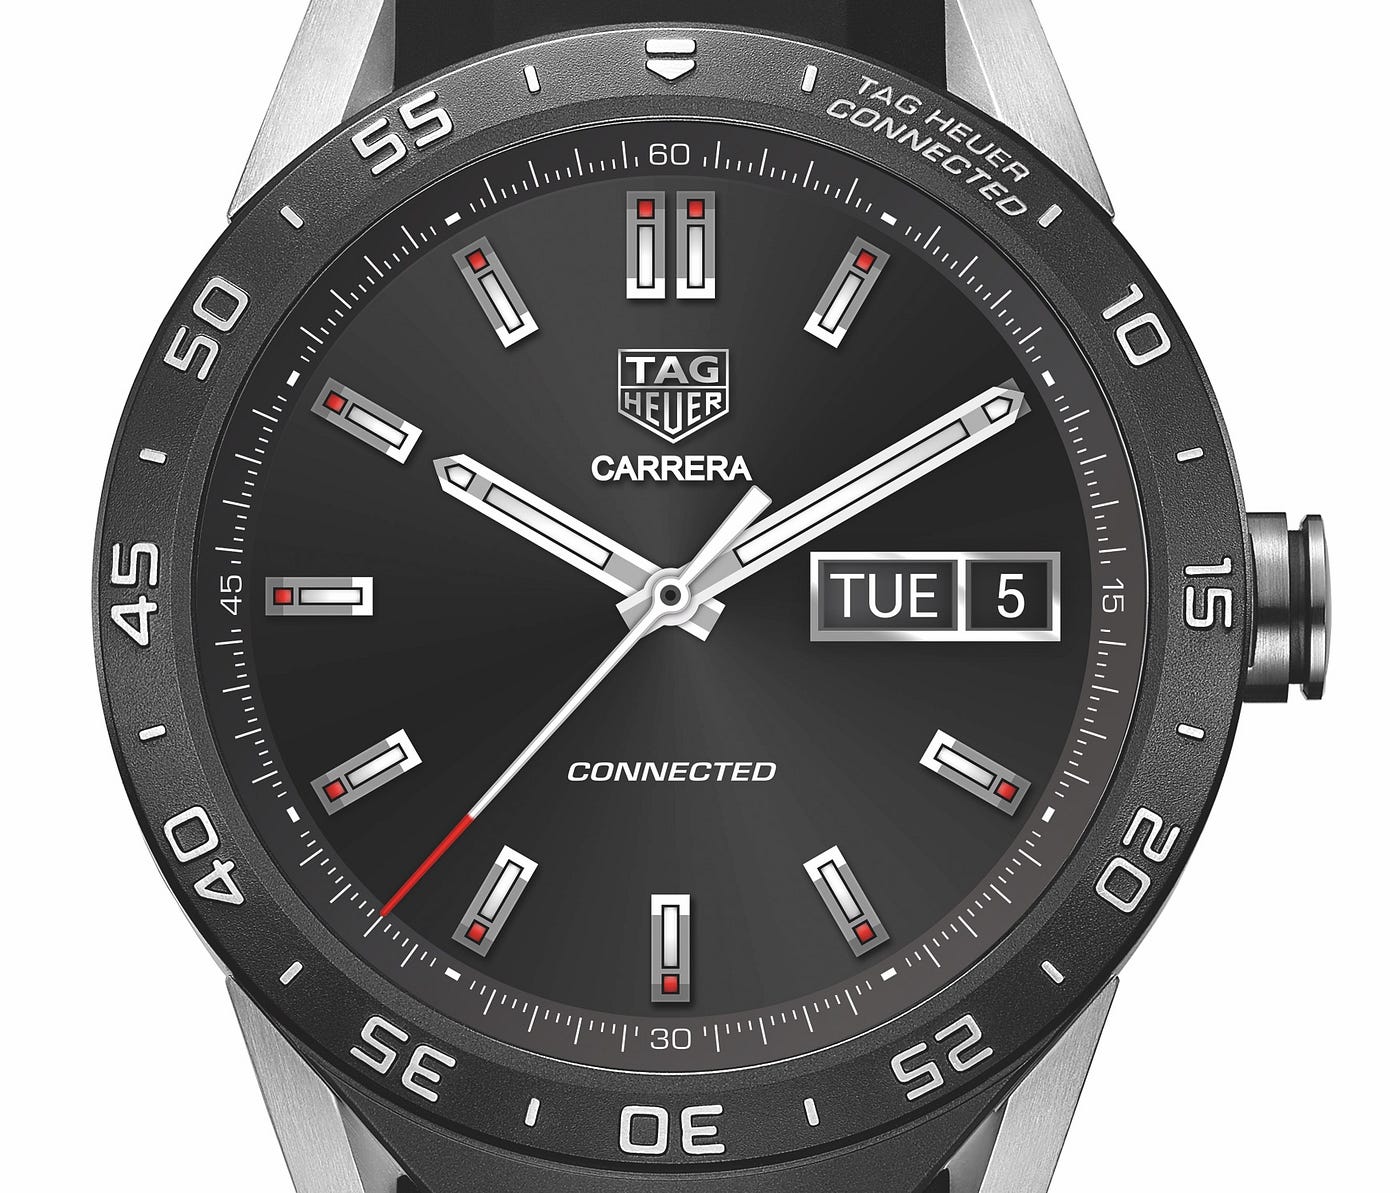 Owner review: TAG Heuer Carrera Heuer 01 - FIFTH WRIST